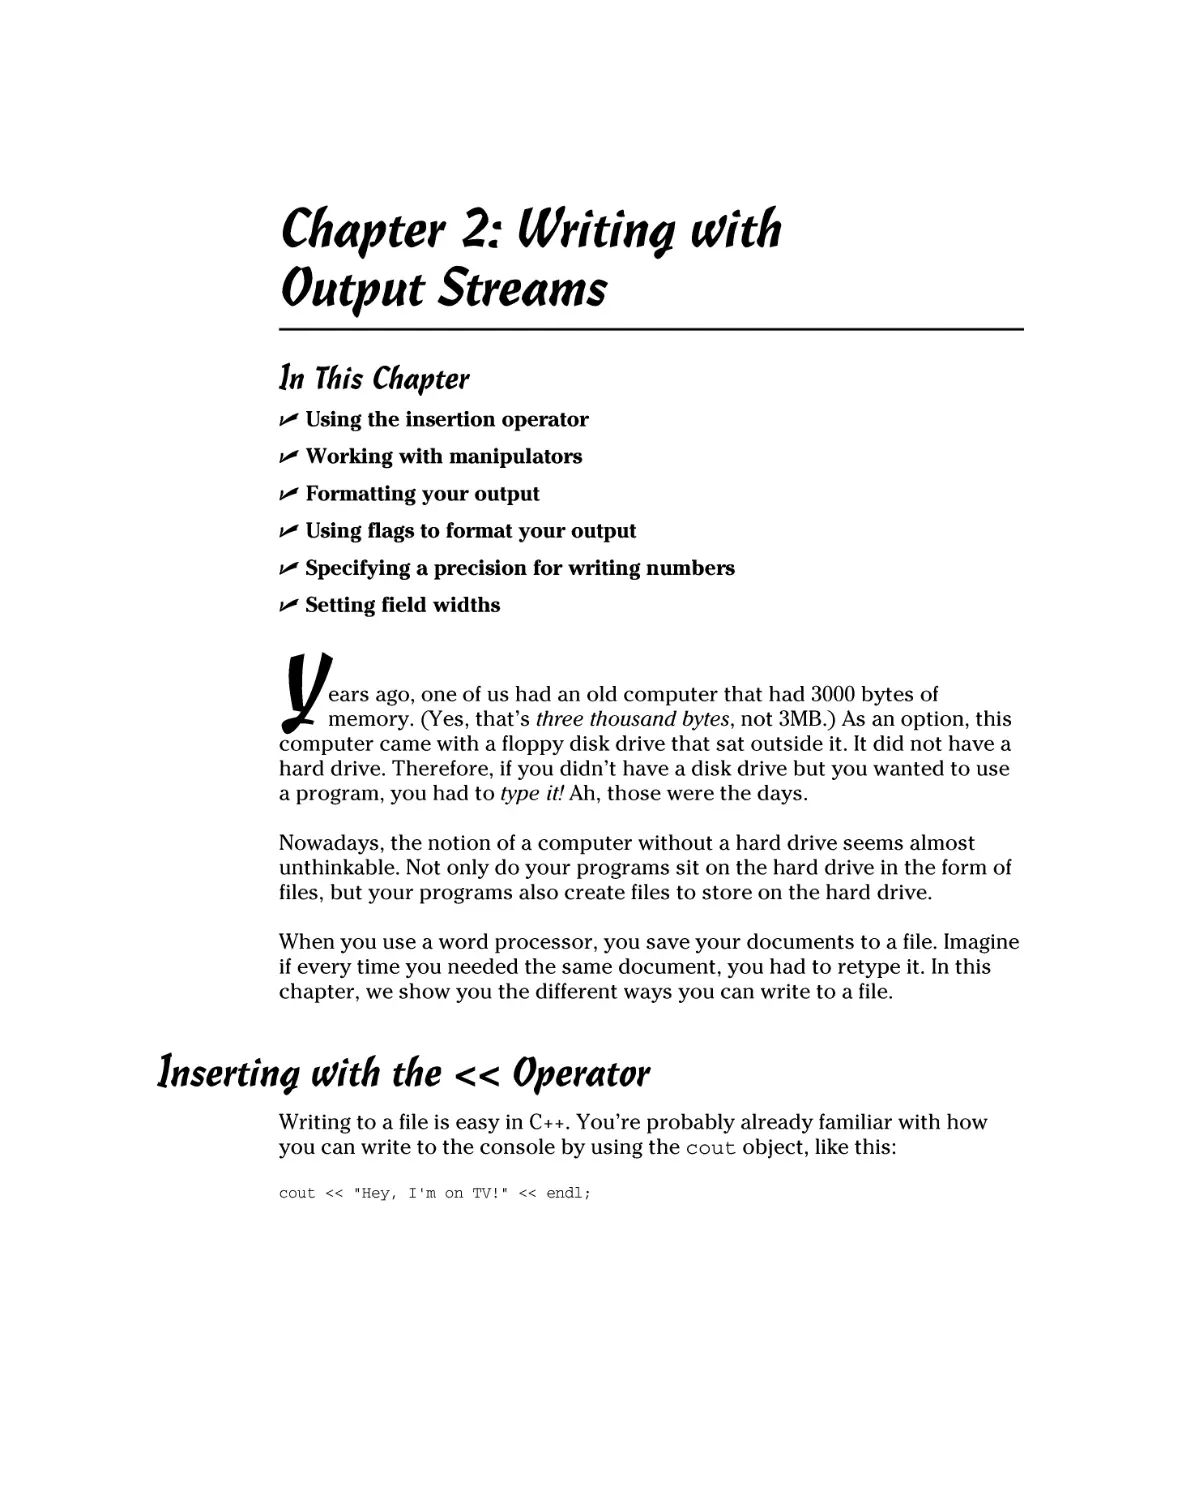 Chapter 2
Inserting with the &lt;&lt; Operator